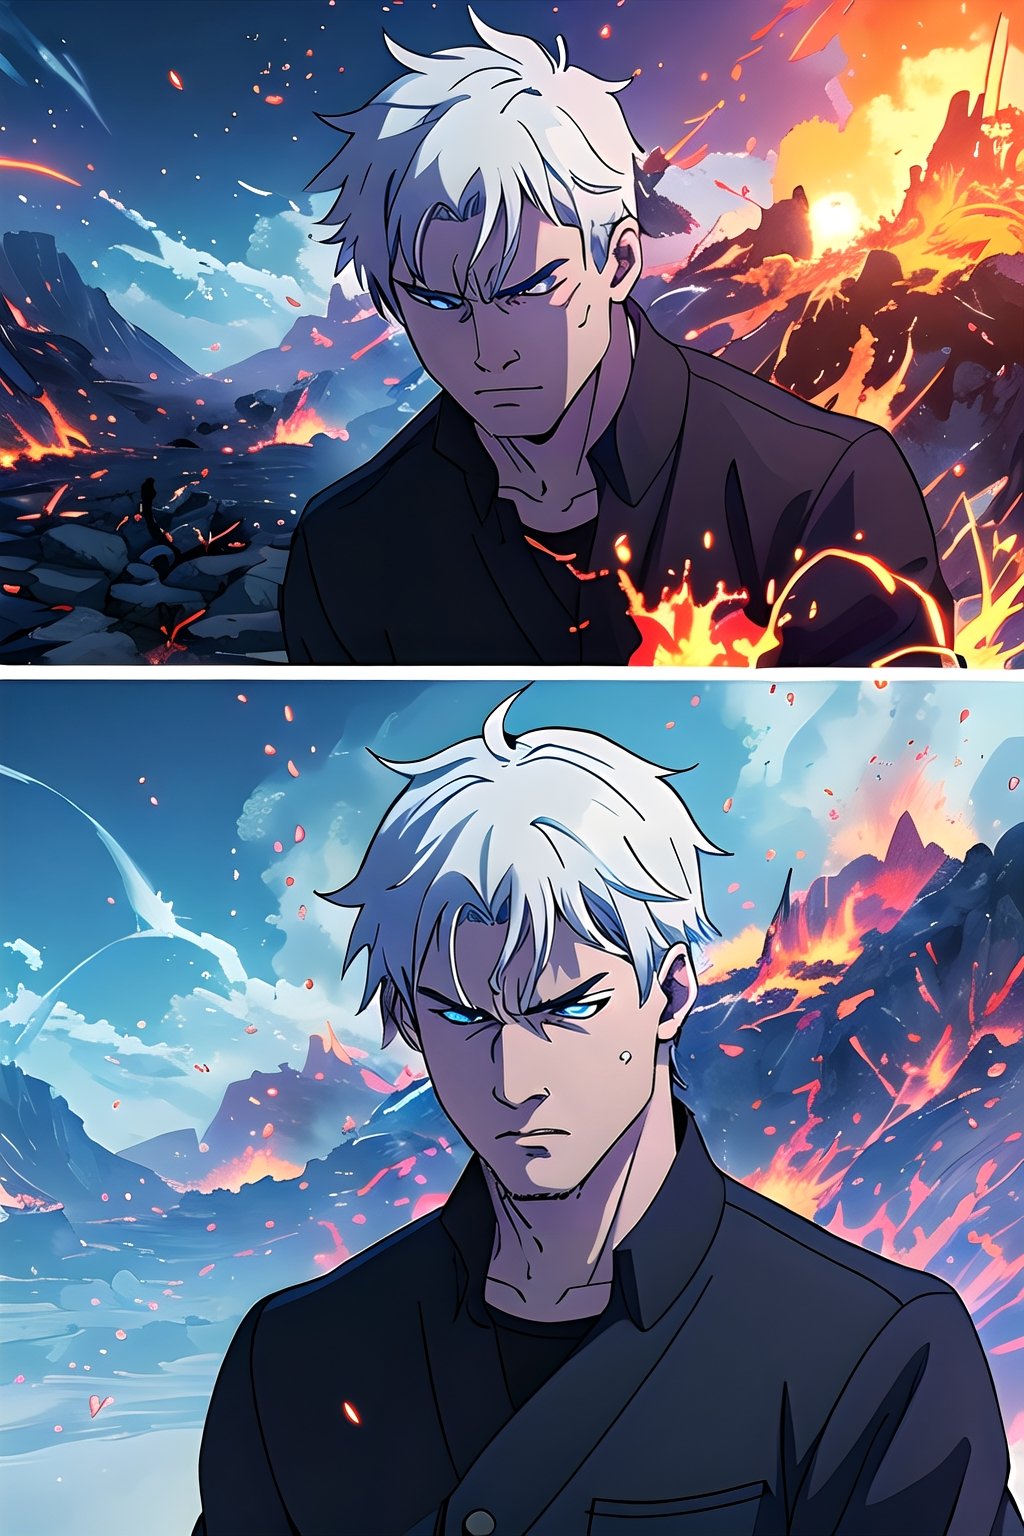 "Craft a highly detailed and emotionally charged depiction of Gojo Satoru in an epic fight, white short hair, with his intense blue eyes and white hair accentuated against a backdrop of roaring flames, drawing inspiration from the captivating style of Makoto Shinkai."